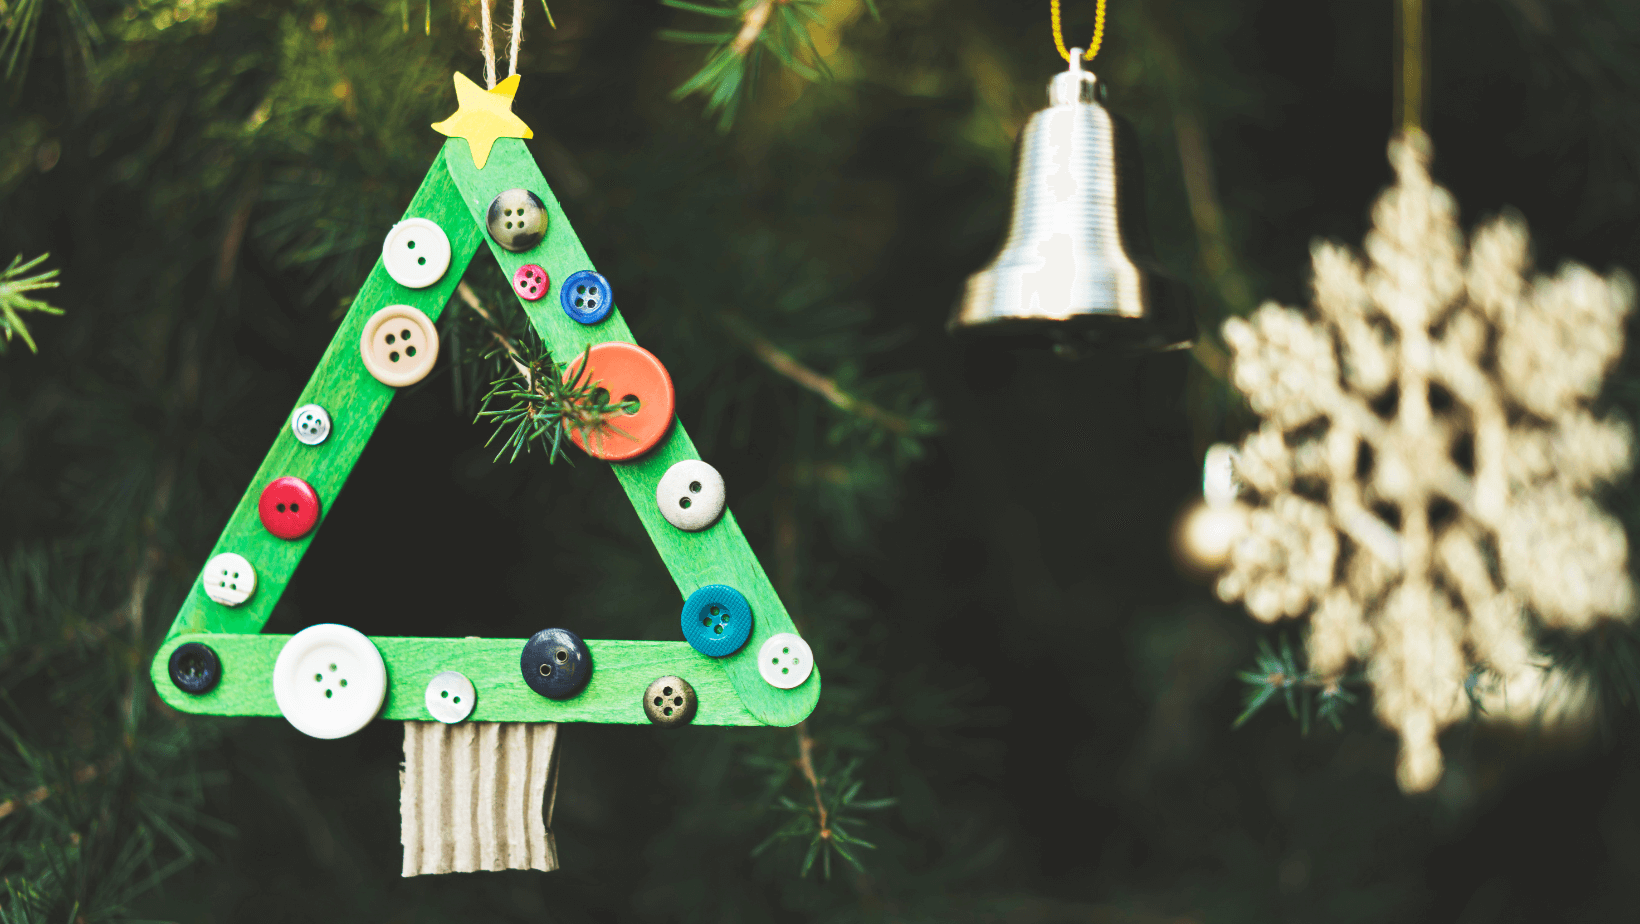 a green Christmas ornament hangs from a tree